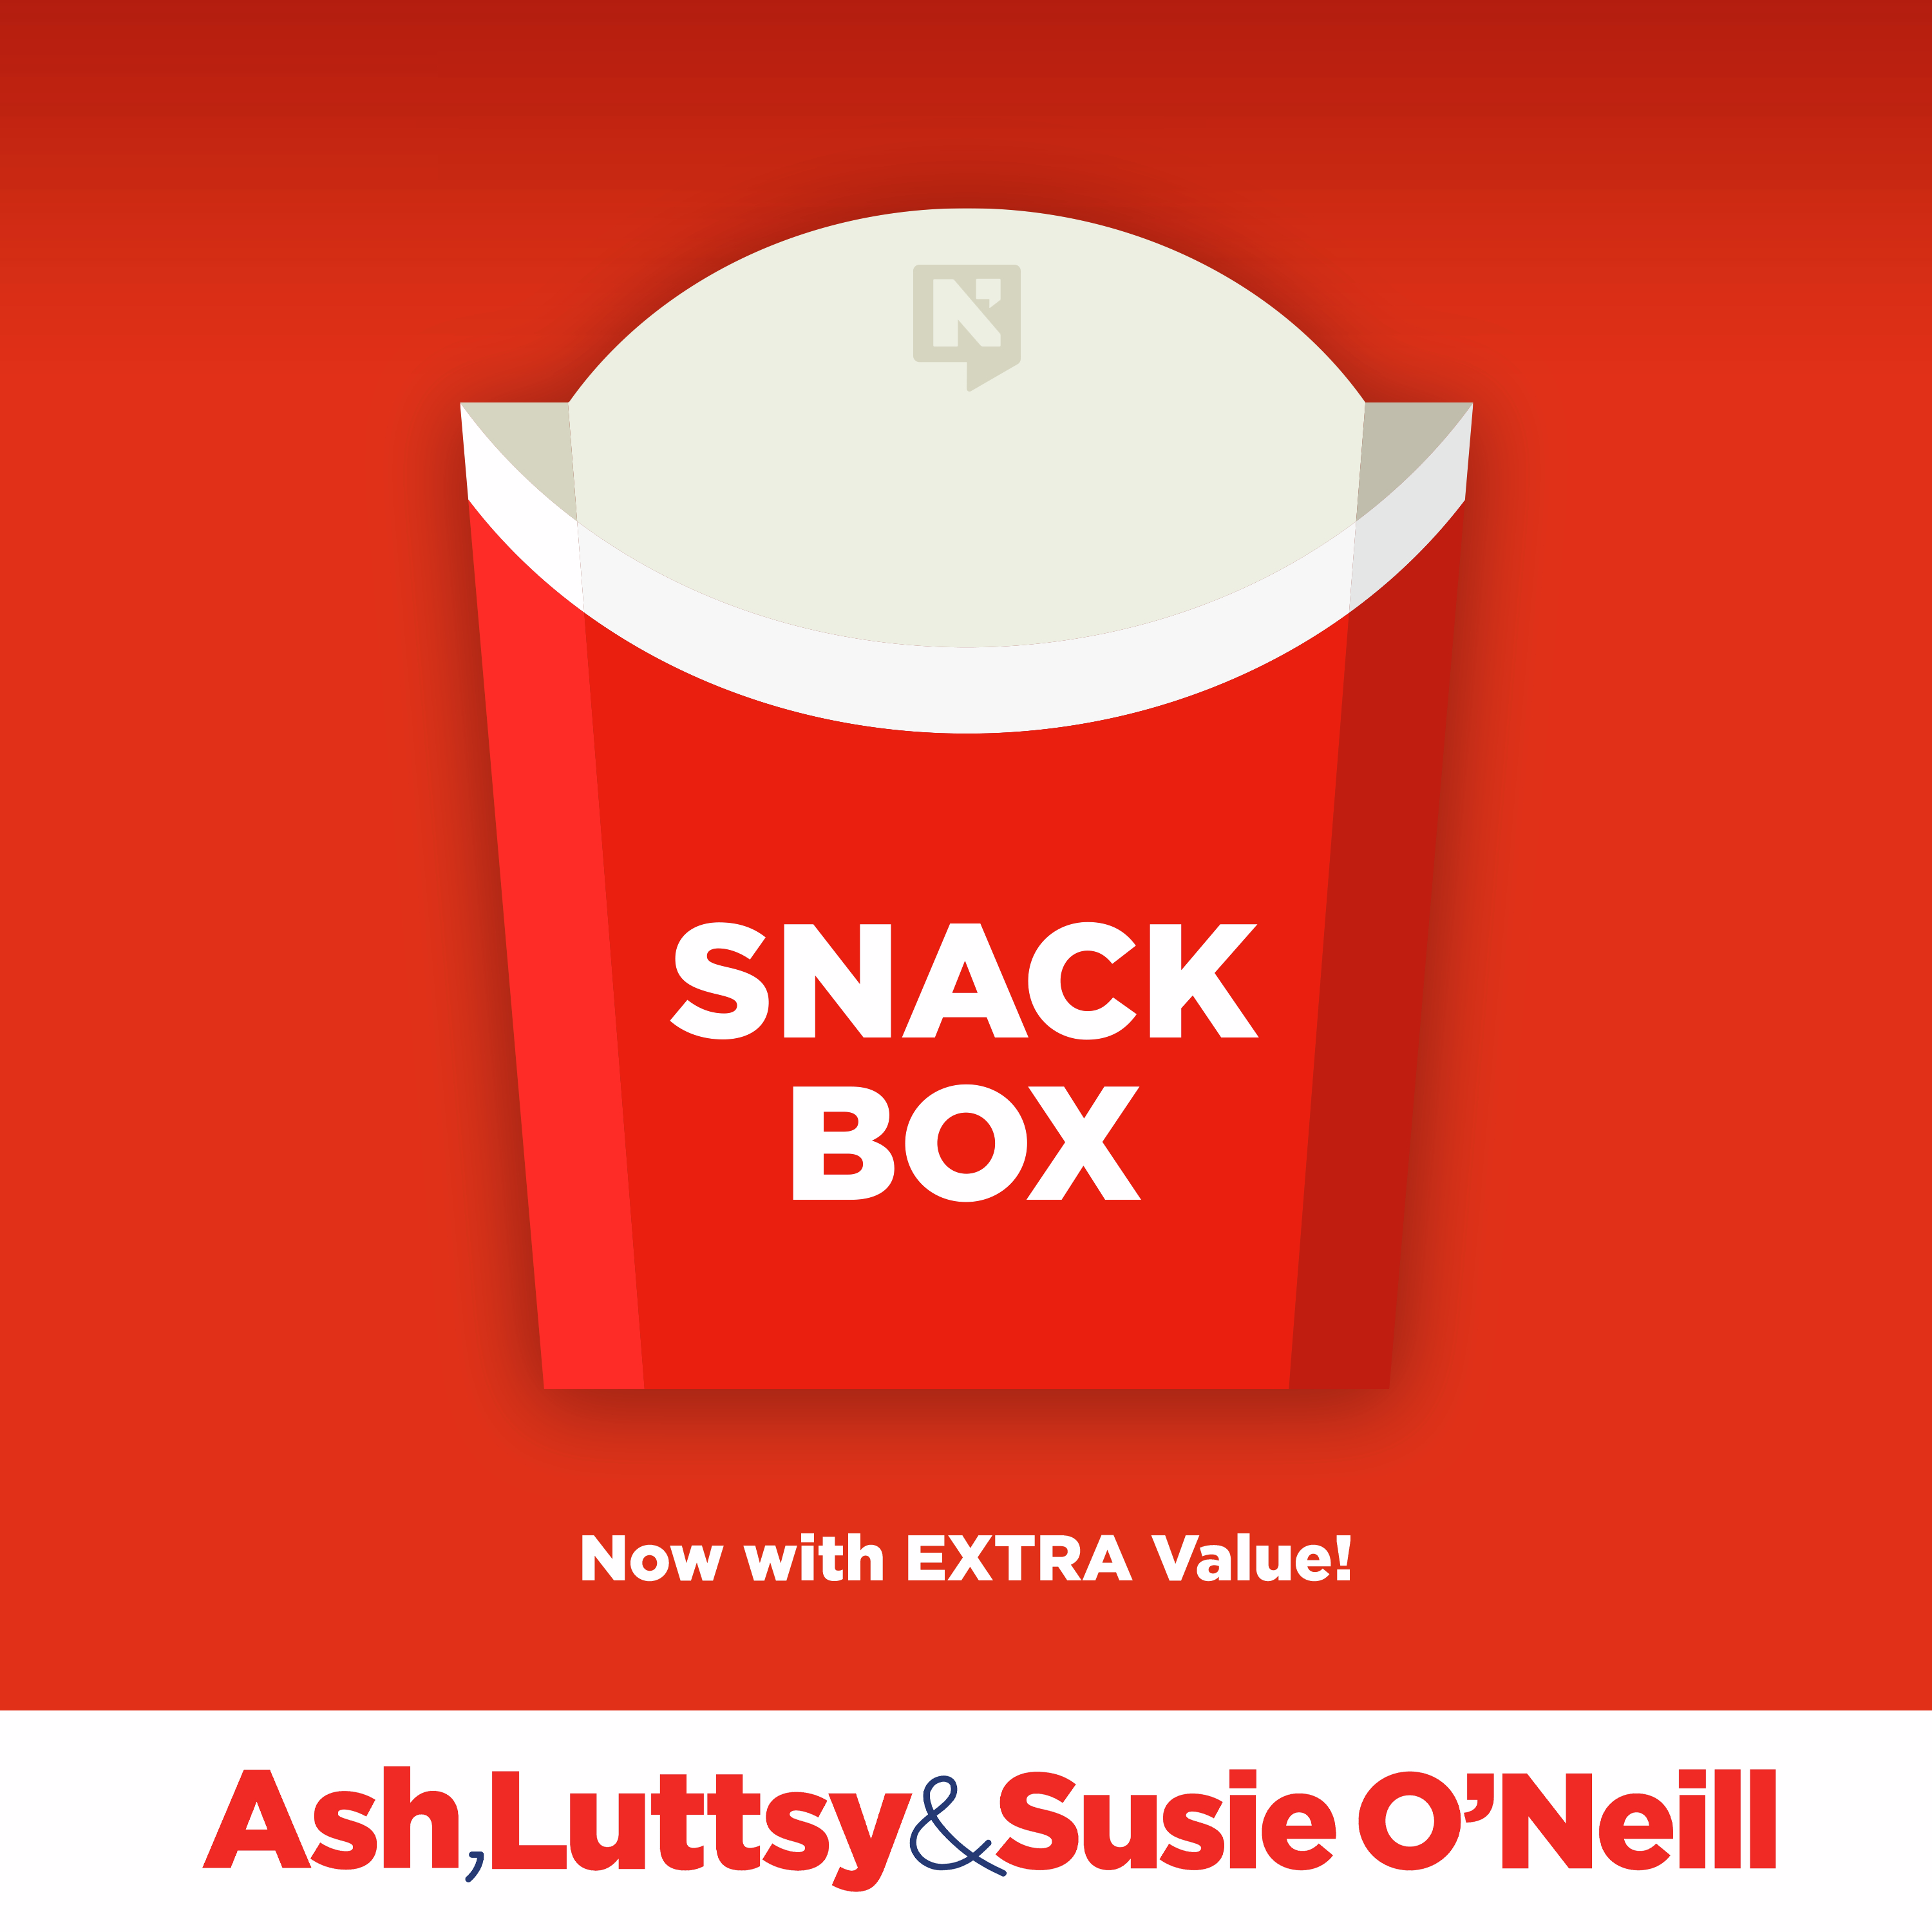 The Ash, Luttsy and Susie Snackbox | Wednesday 19th June